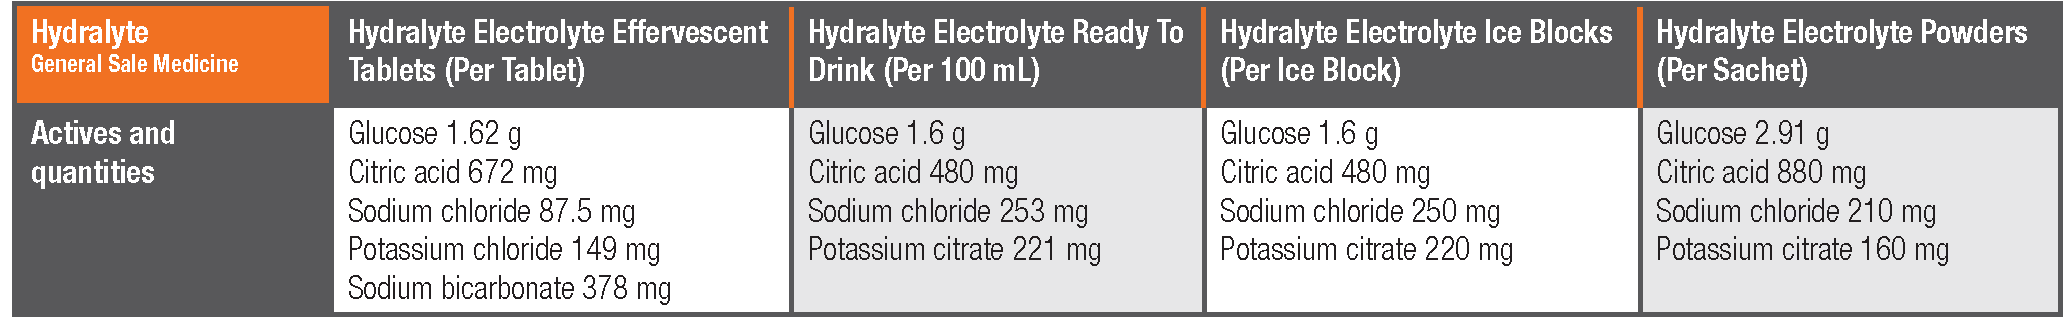 Hydralyte - Actives and quantities